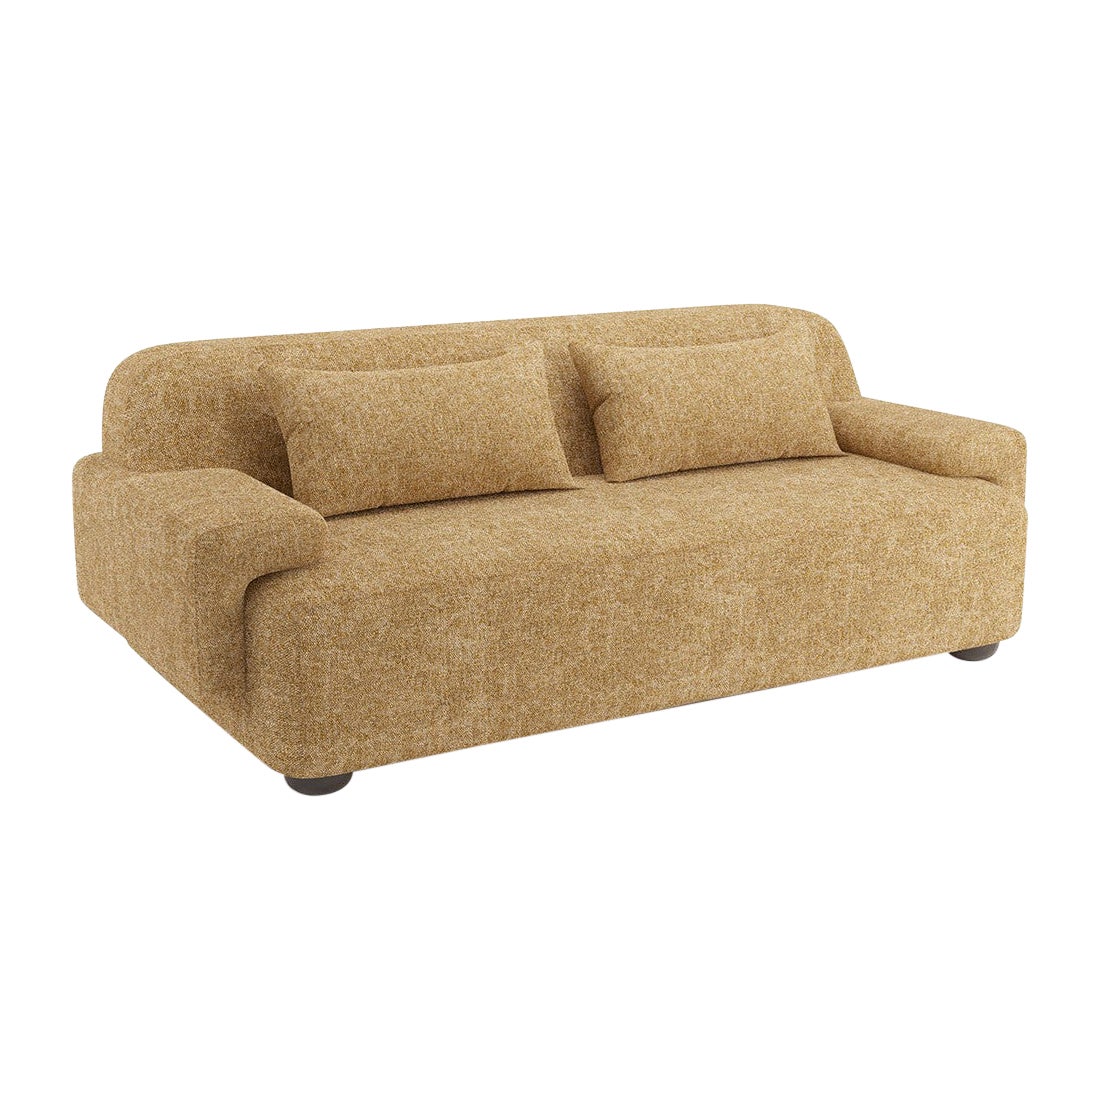 Popus Editions Lena 3 Seater Sofa in Ocher London Linen Fabric For Sale